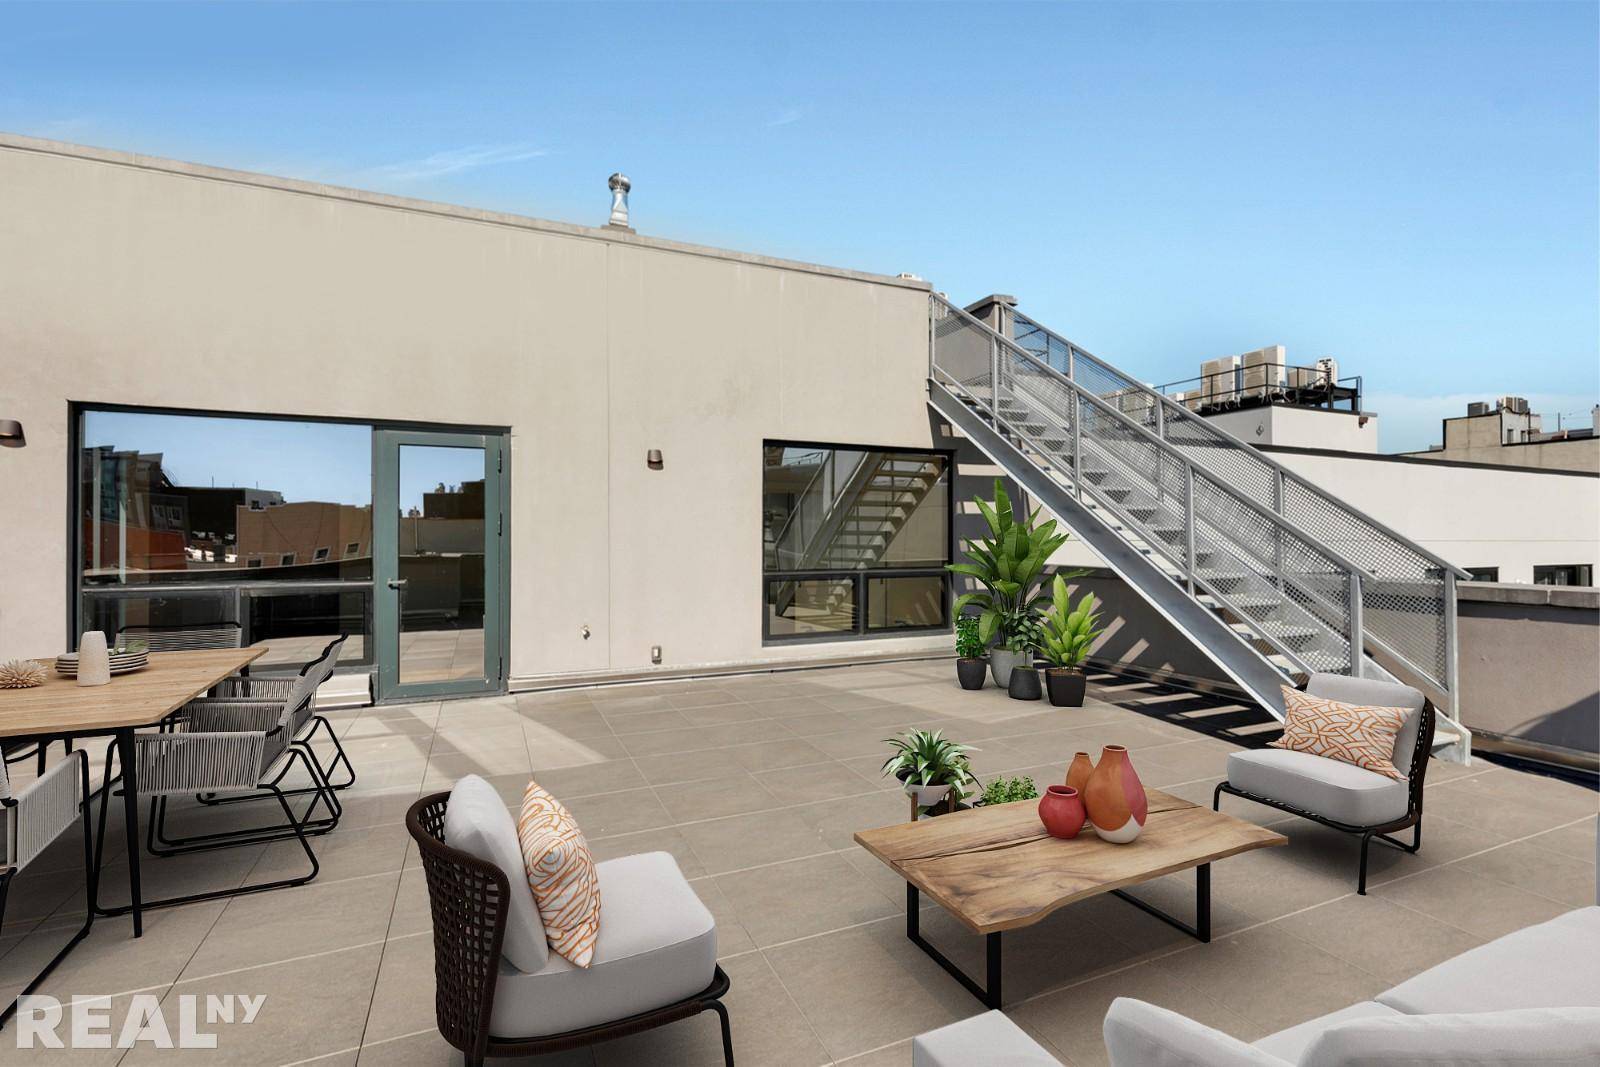 IMMEDIATE OCCUPANCY ! An entertainers dream, this spectacular top floor 2 bedroom, 2 bathroom residence has an impressive 1720 square foot private duplex roof terrace with incredible city views !